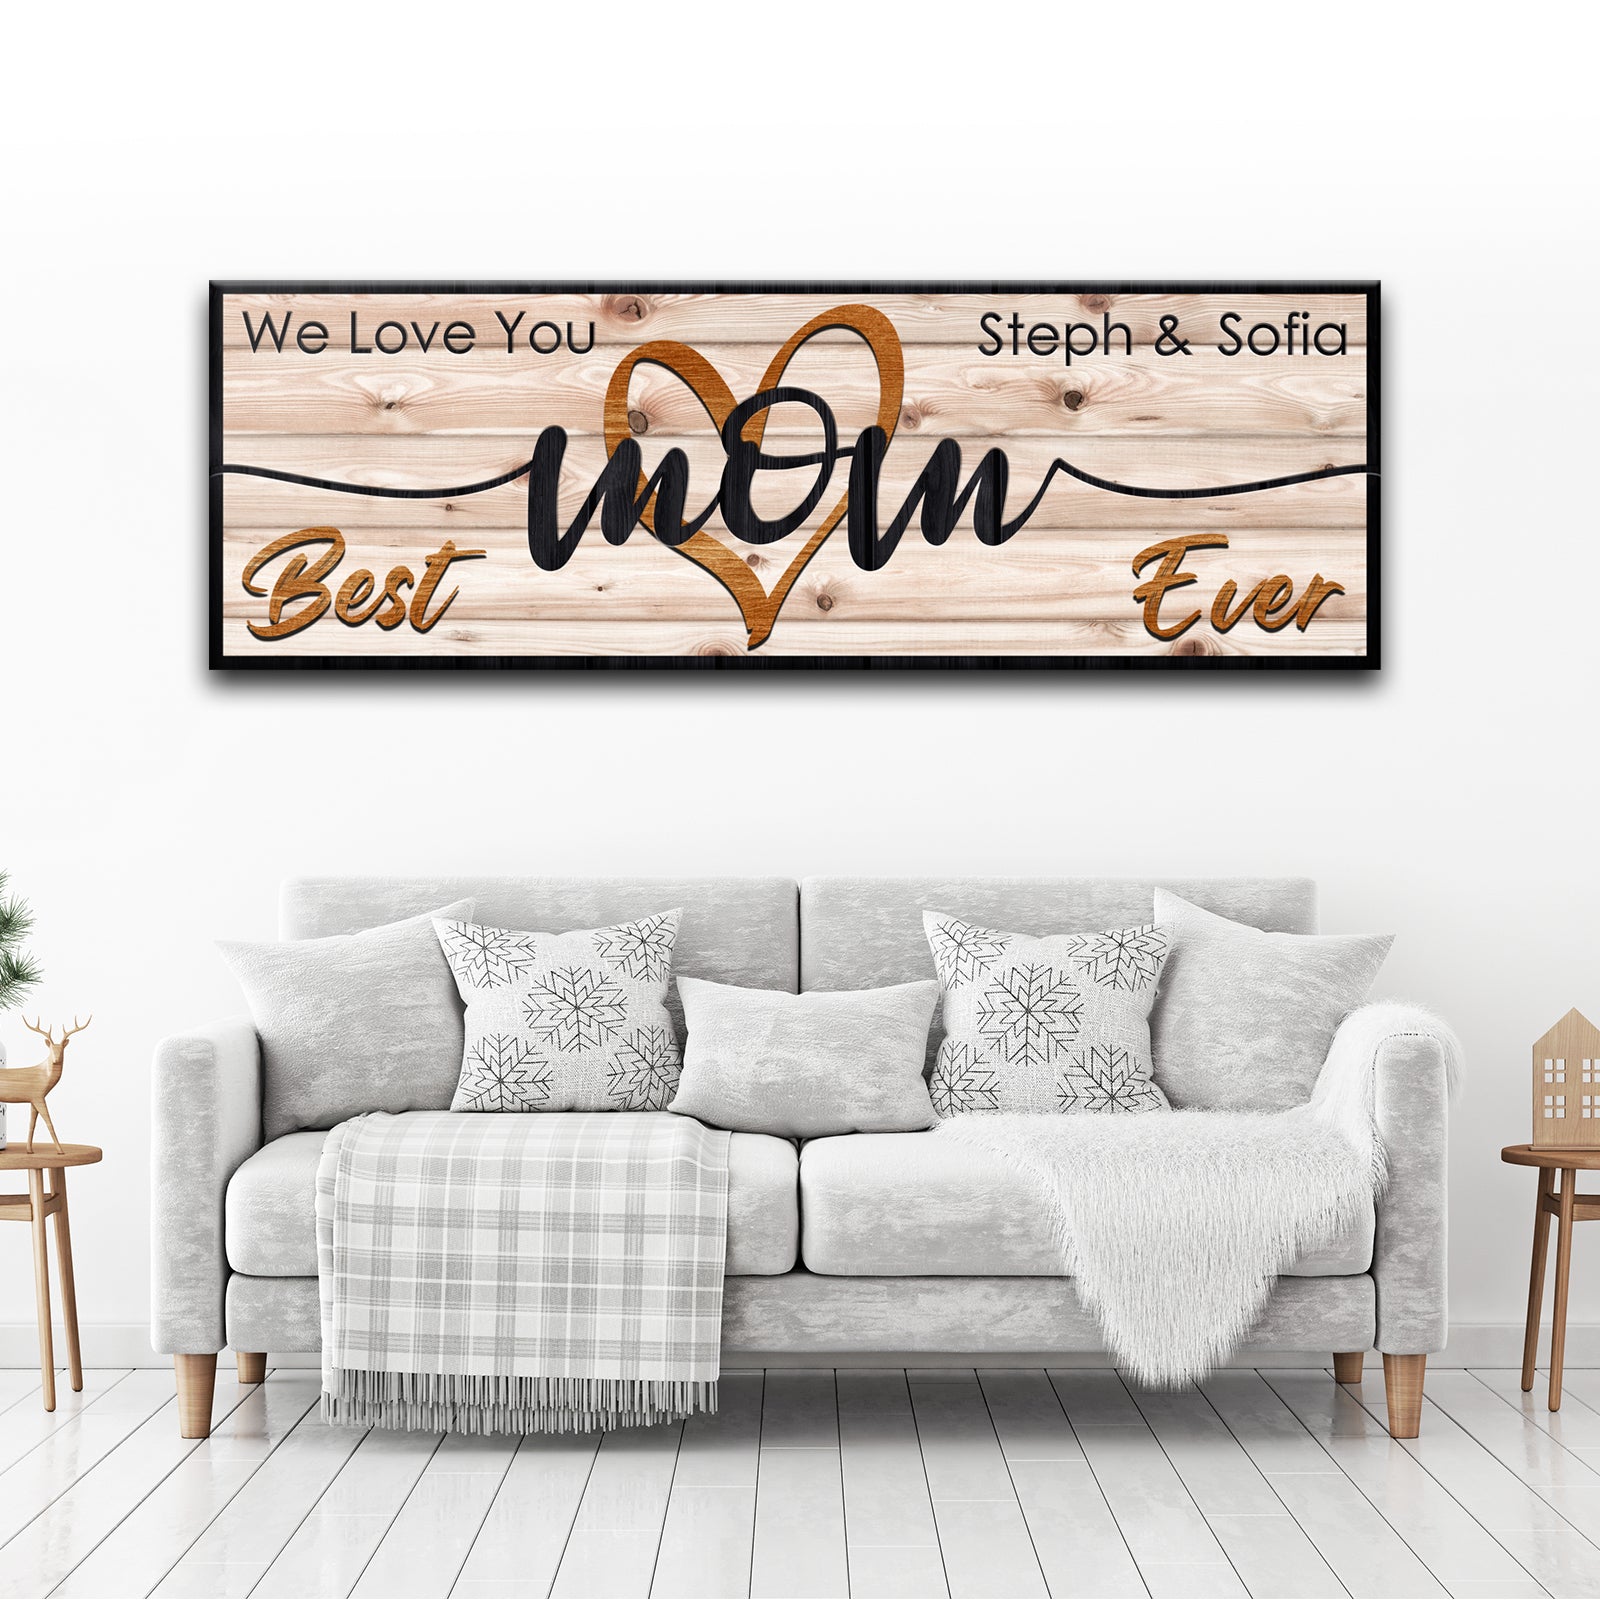 Best MOM Ever Sign Style 2 - Image by Tailored Canvases